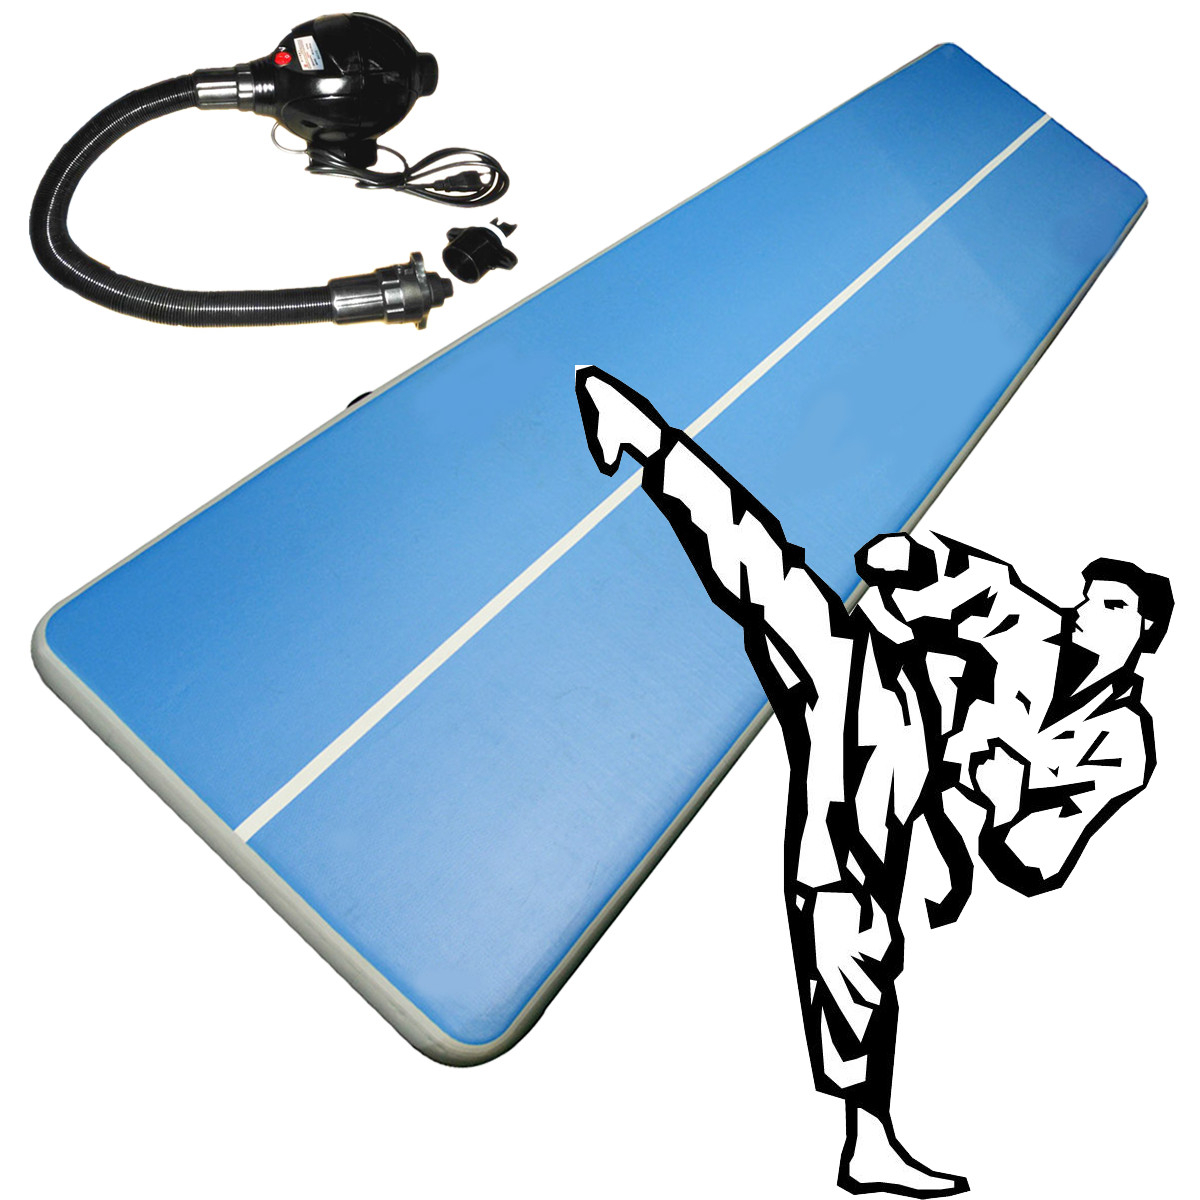 

157x79x8inch Airtrack Gymnastics Mat Inflatable GYM Air Track Mat Gym Mat Tumbling Cheerleading Pad with Pump